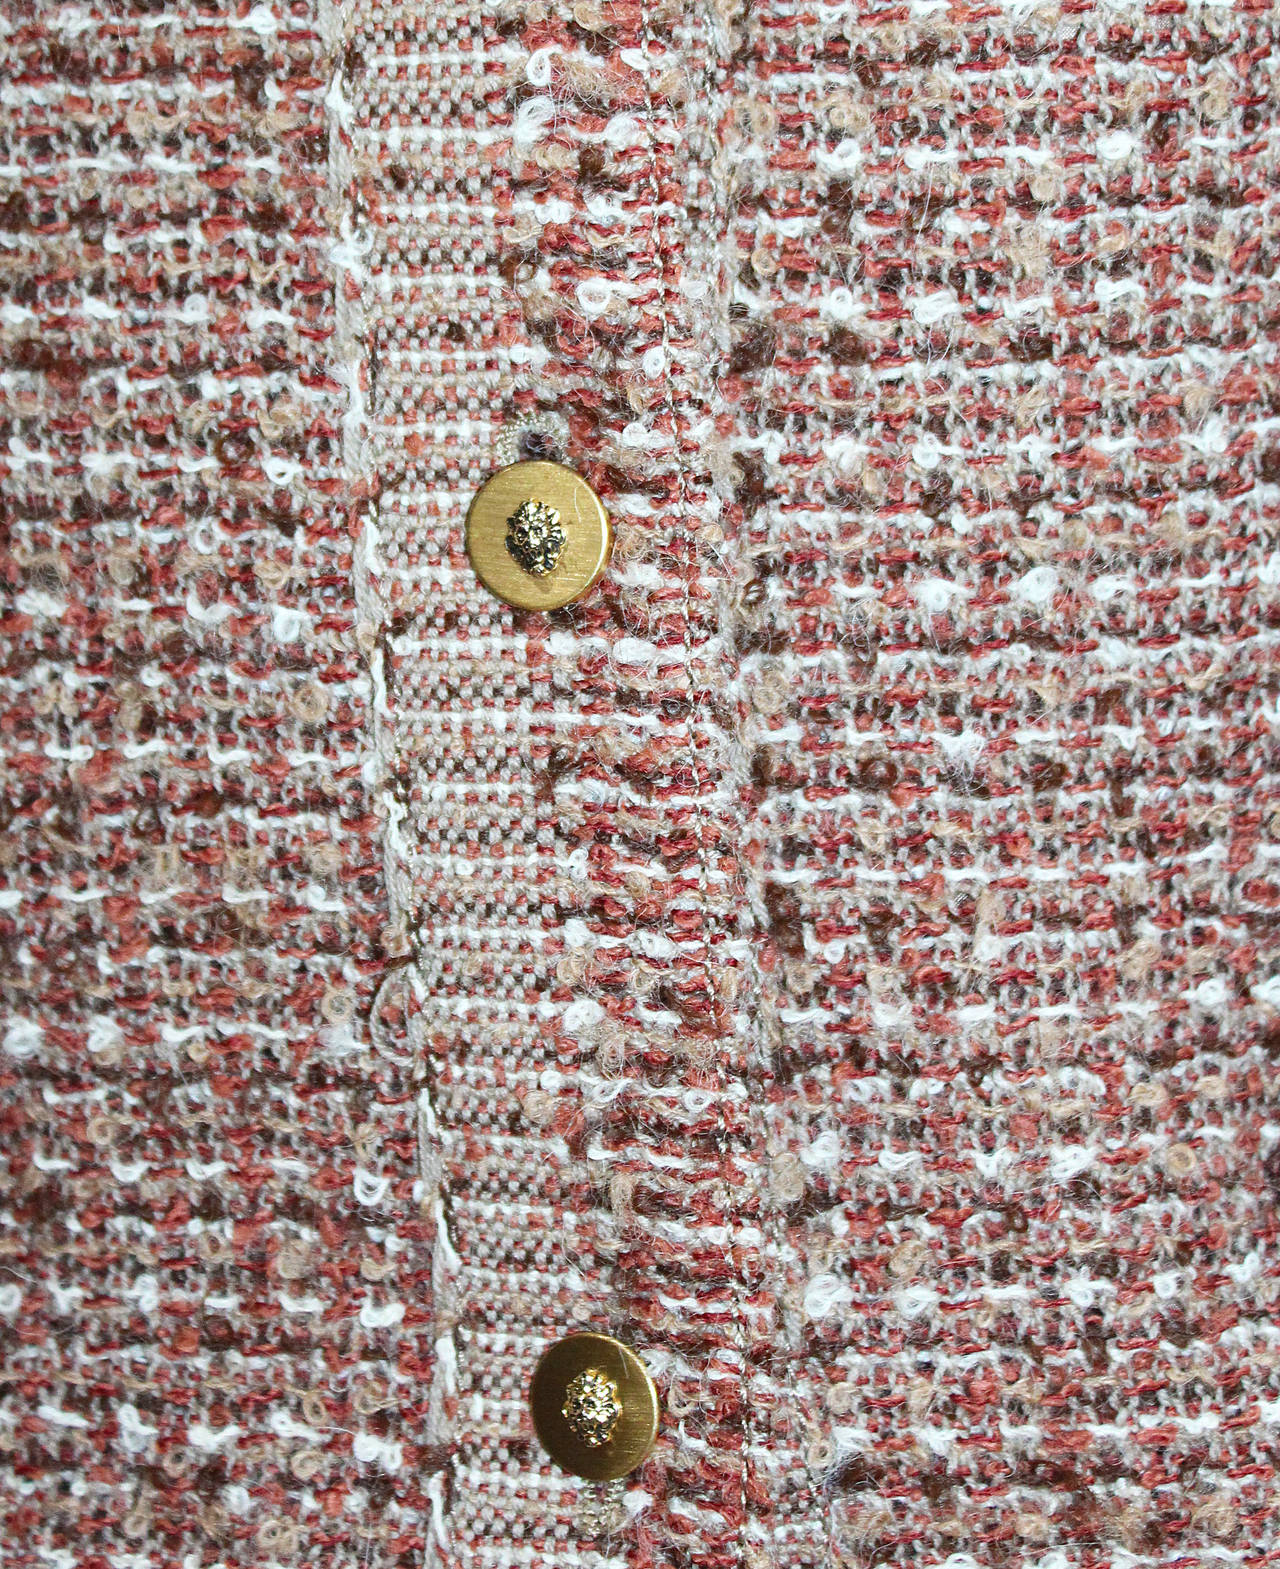 An iconic Chanel suit from the 1970s. 

Ensemble includes

- Chanel tweed jacket, lined in silk, chain hem, two front open pocket and gold lion buttons

- Chanel checked high neck silk shirt, back zip fastening 

- Chanel tweed skirt, two